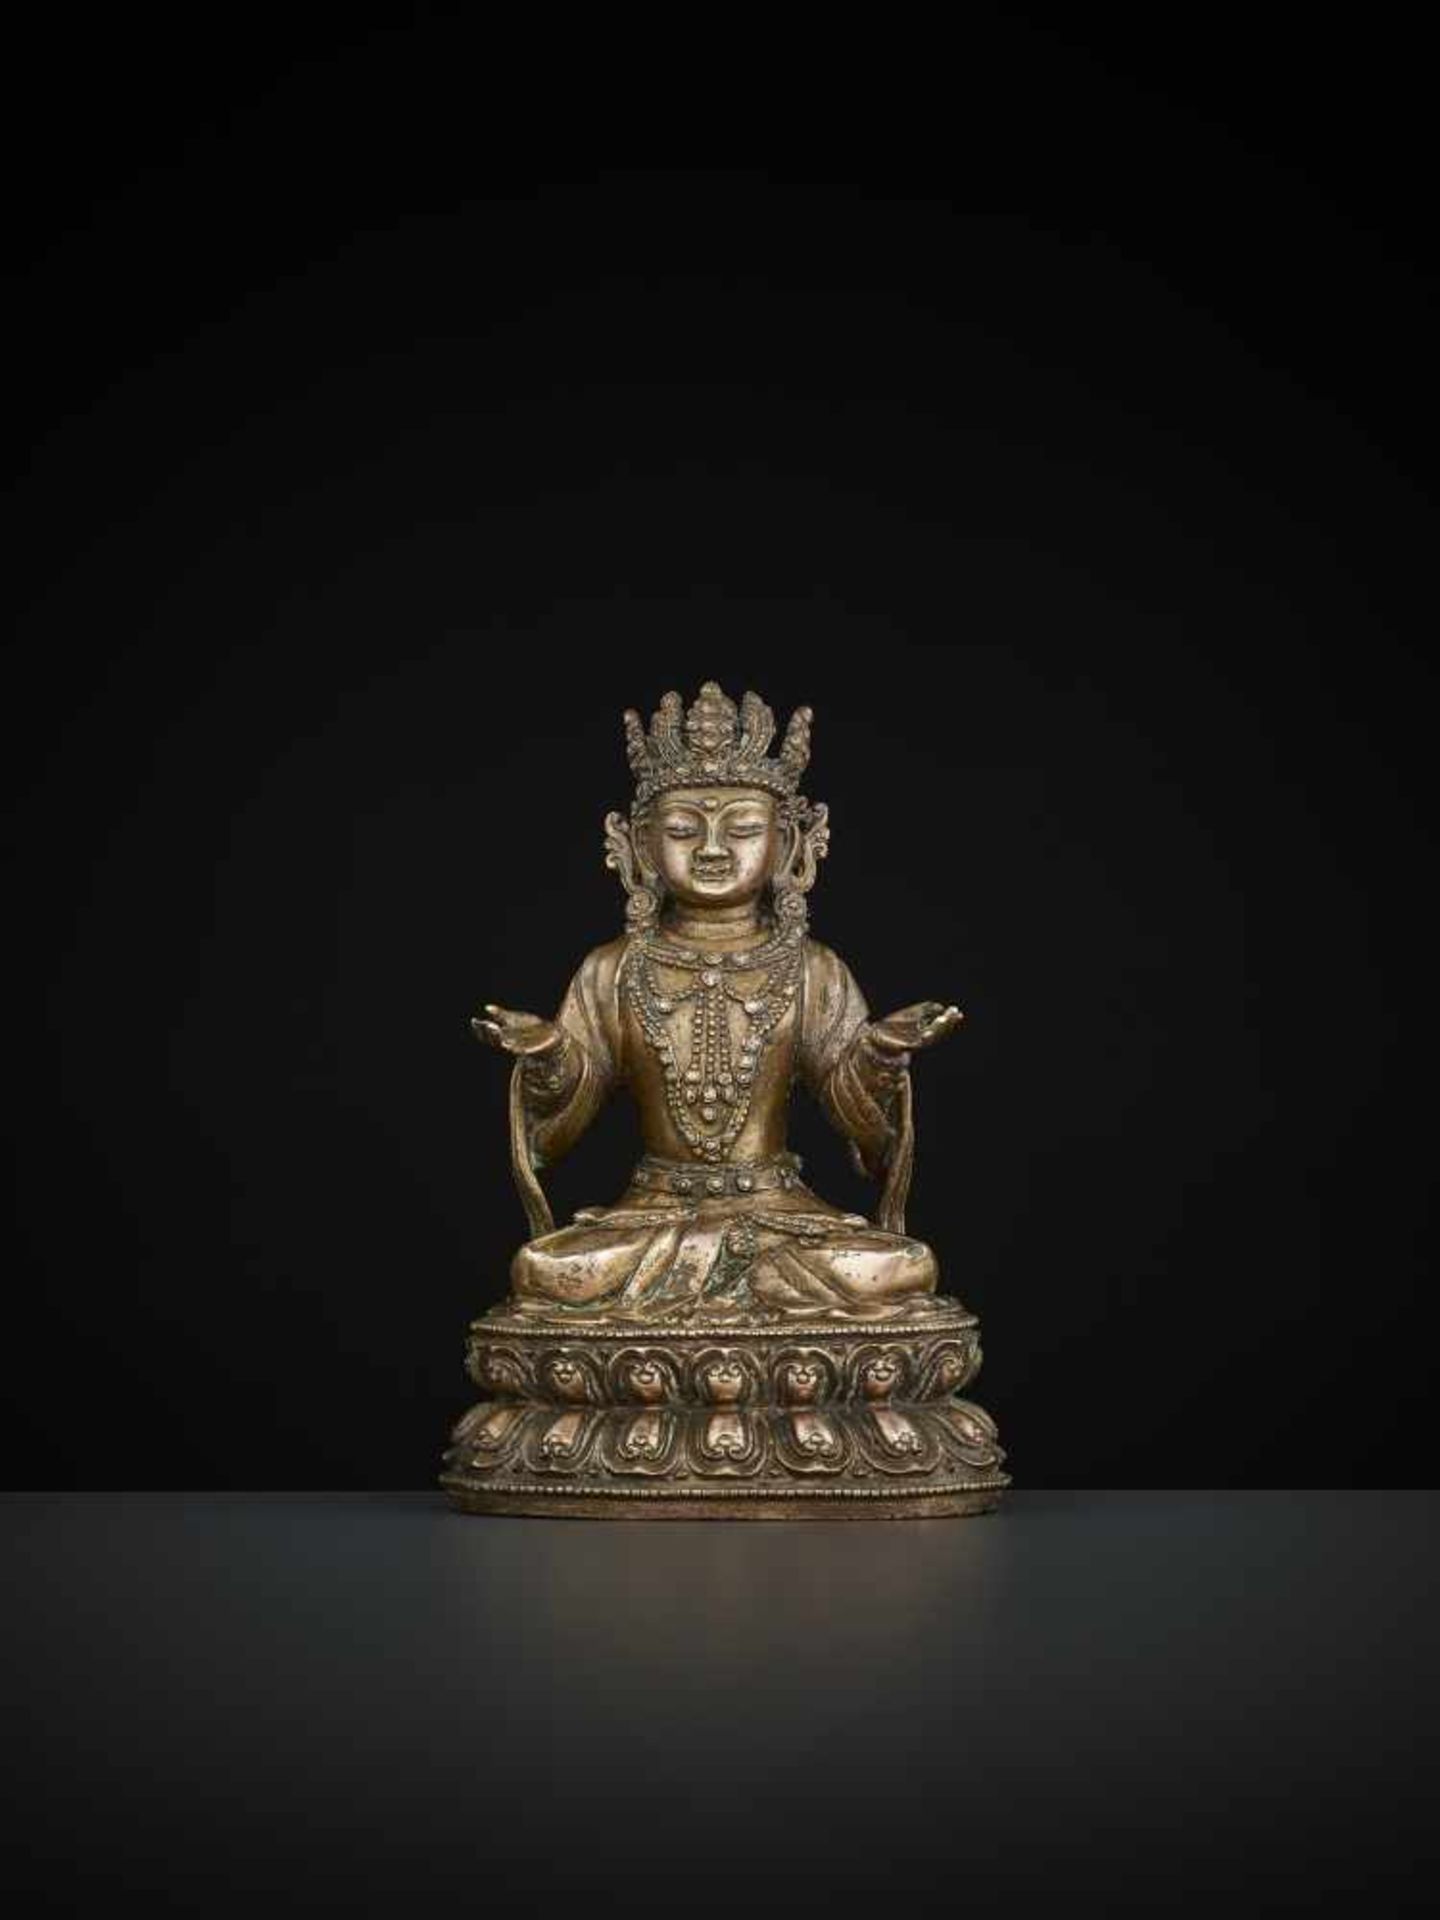 A COPPER-BRONZE STATUE OF BODHISATTVA Tibetan-Chinese, 15th – 16th century. Bodhisattva is seated in - Image 3 of 11